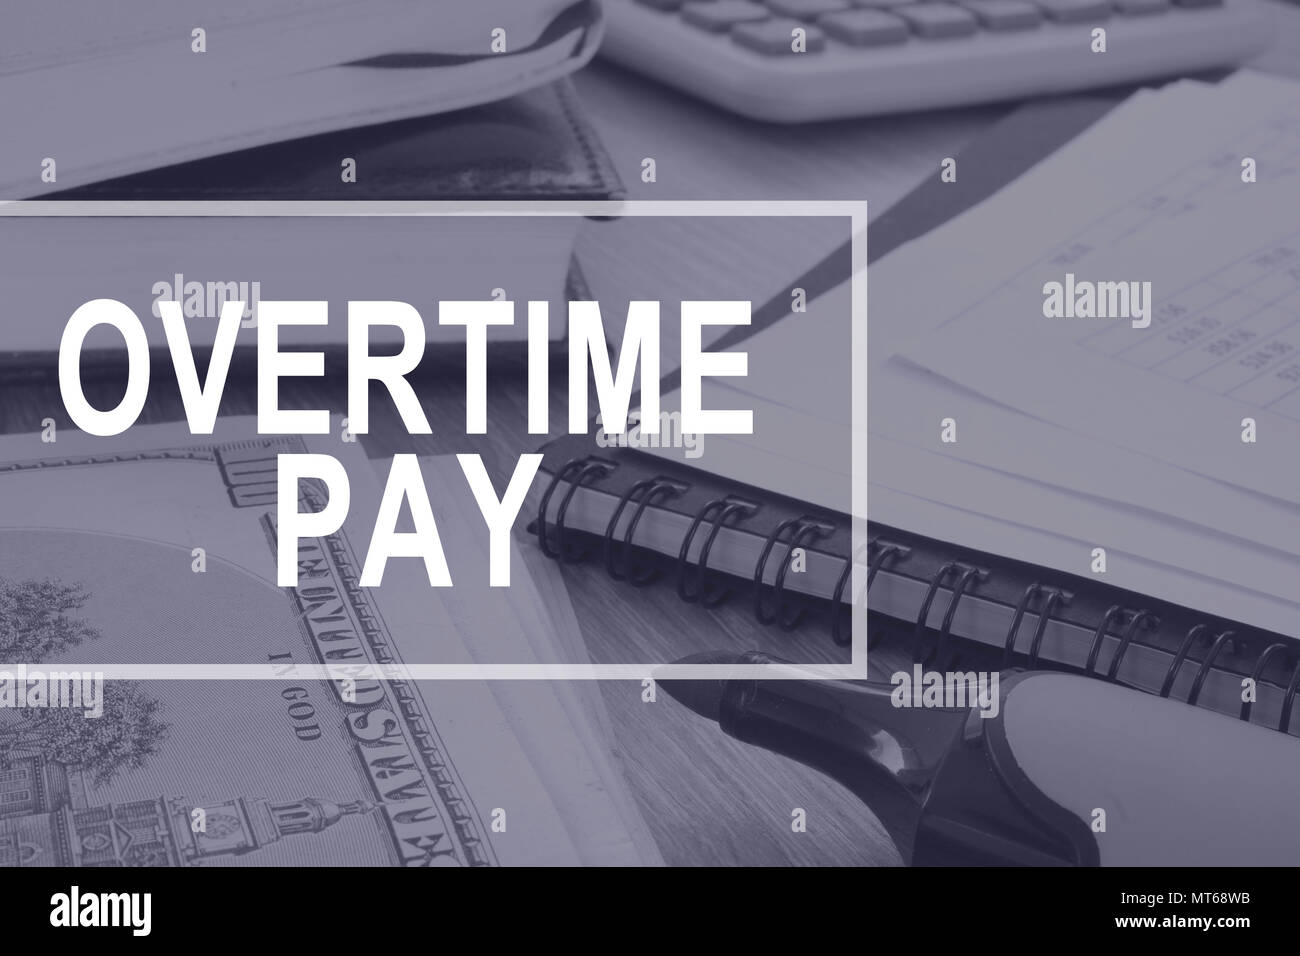 Overtime pay. Office desk with calculator and documents. Stock Photo